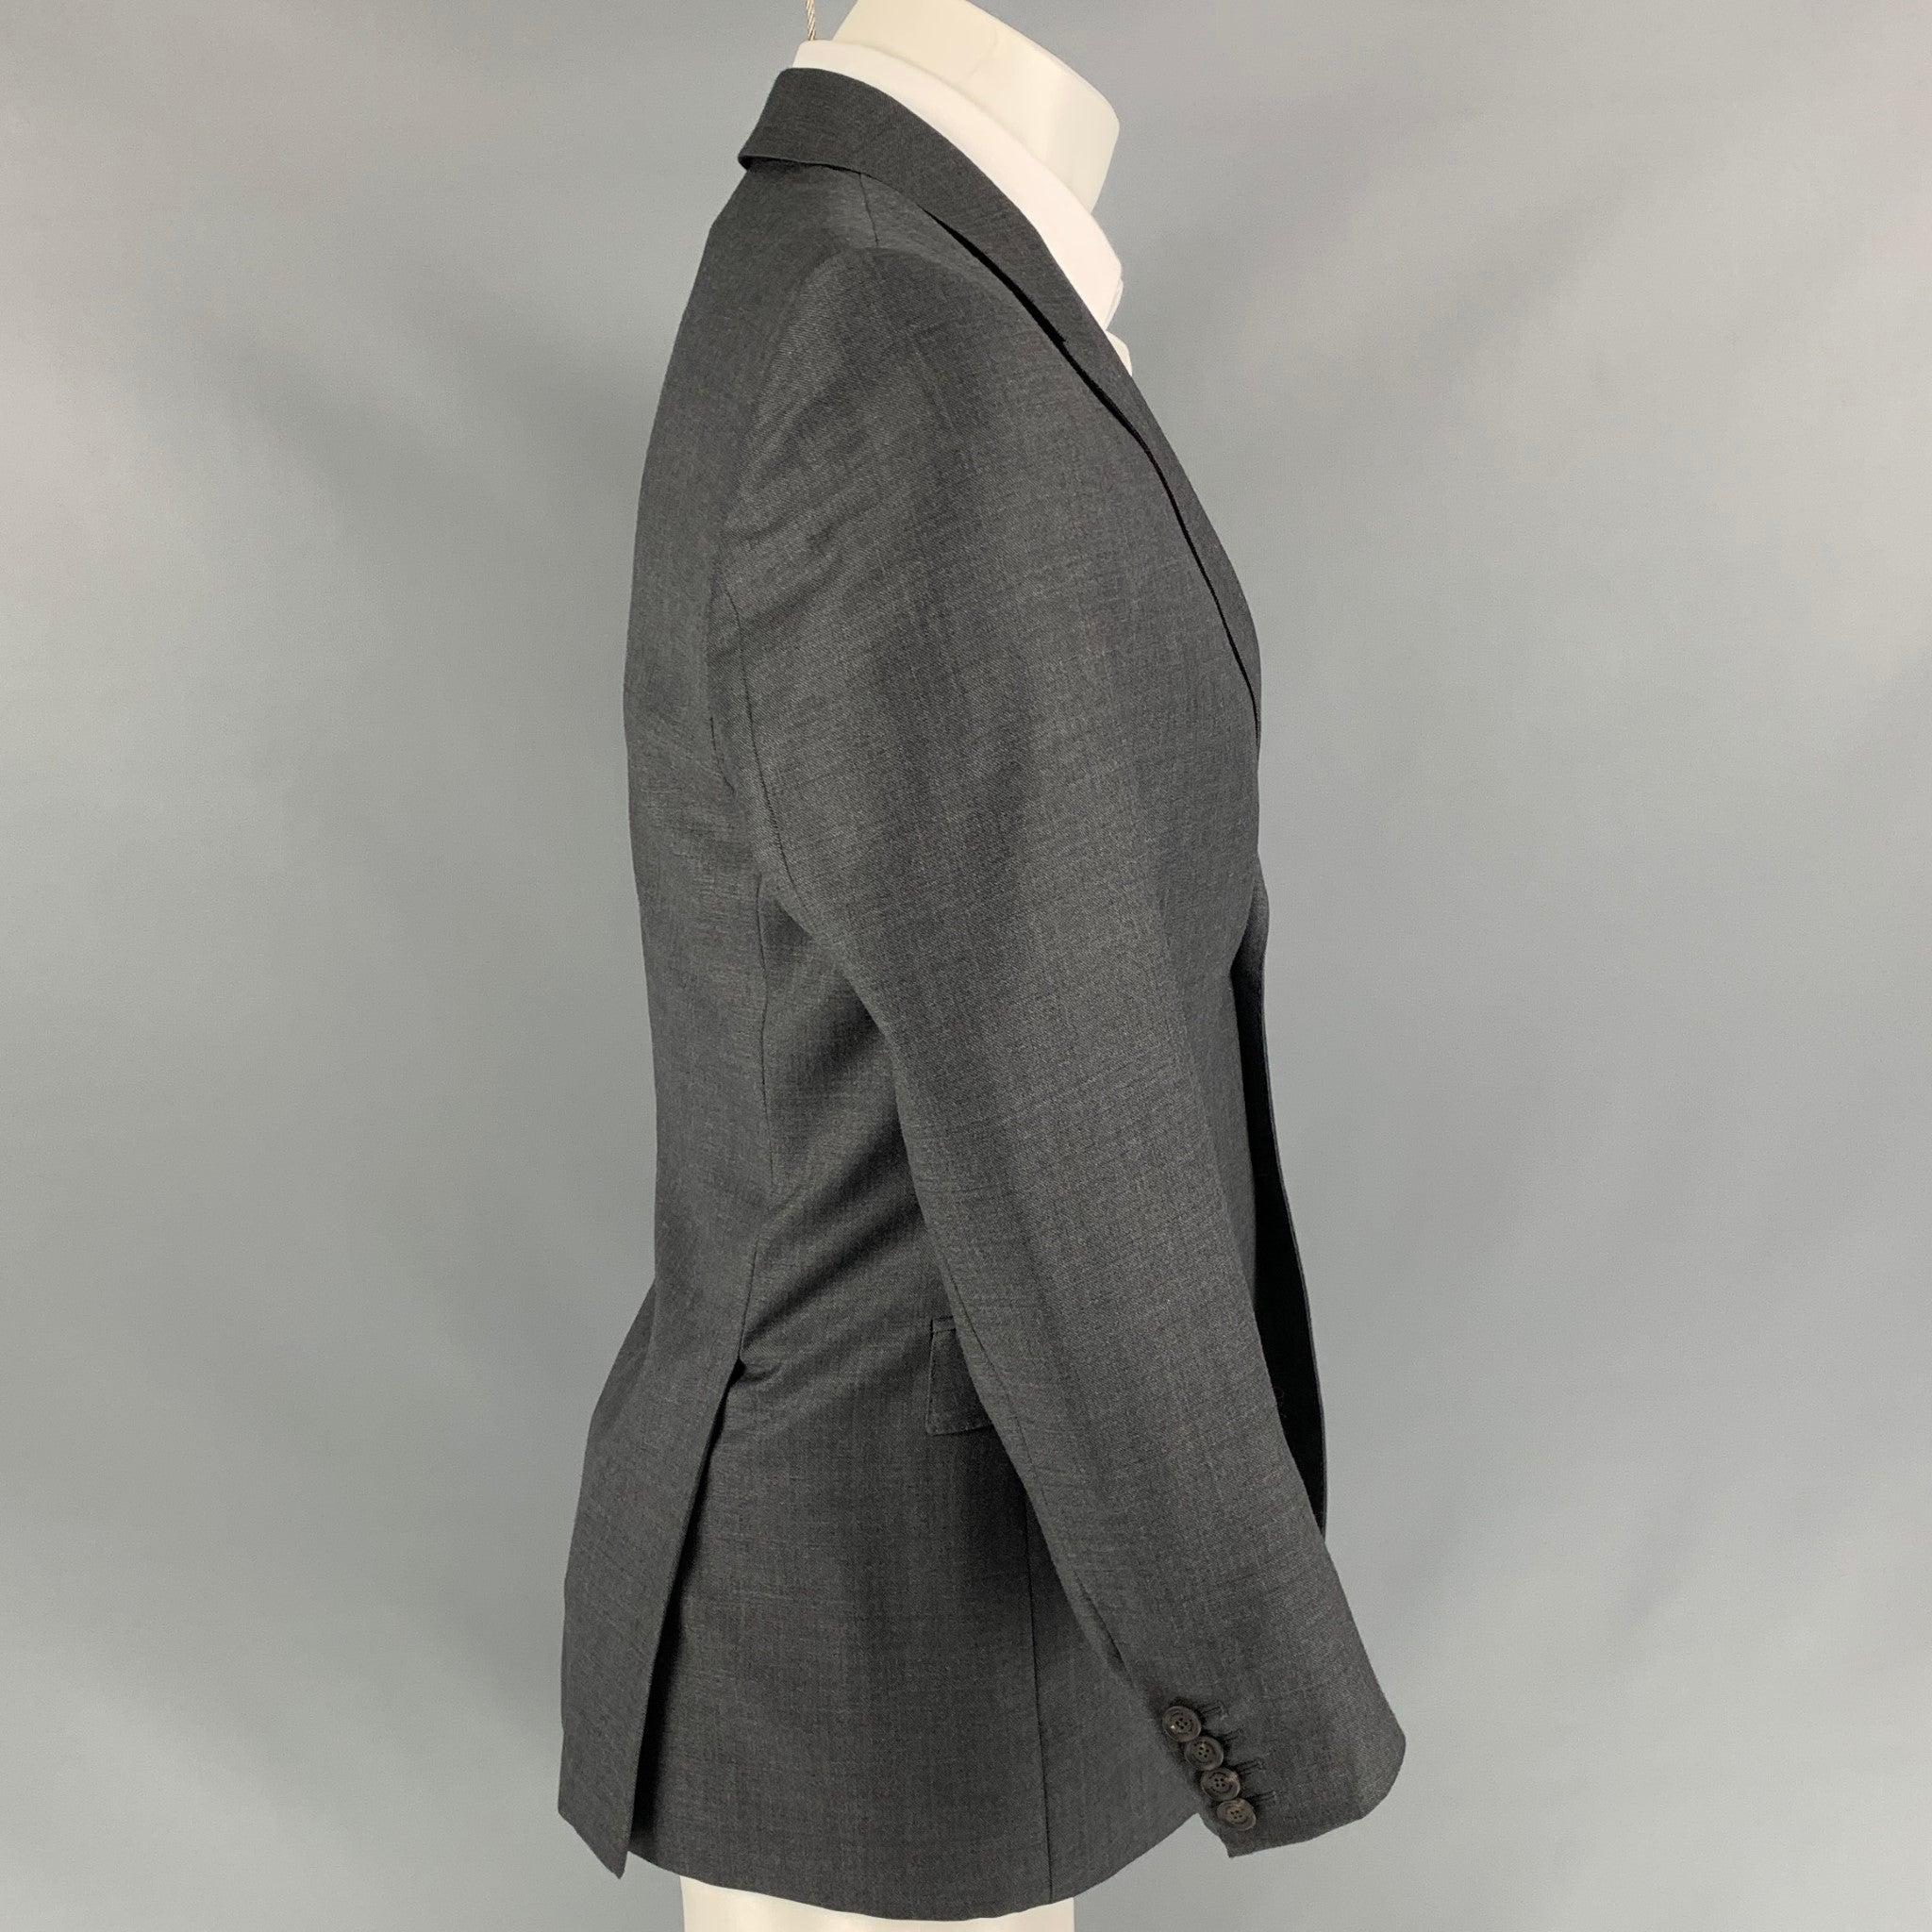 BURBERRY PRORSUM Size 36 Slate Grey Wool Peak Lapel Sport Coat In Good Condition For Sale In San Francisco, CA